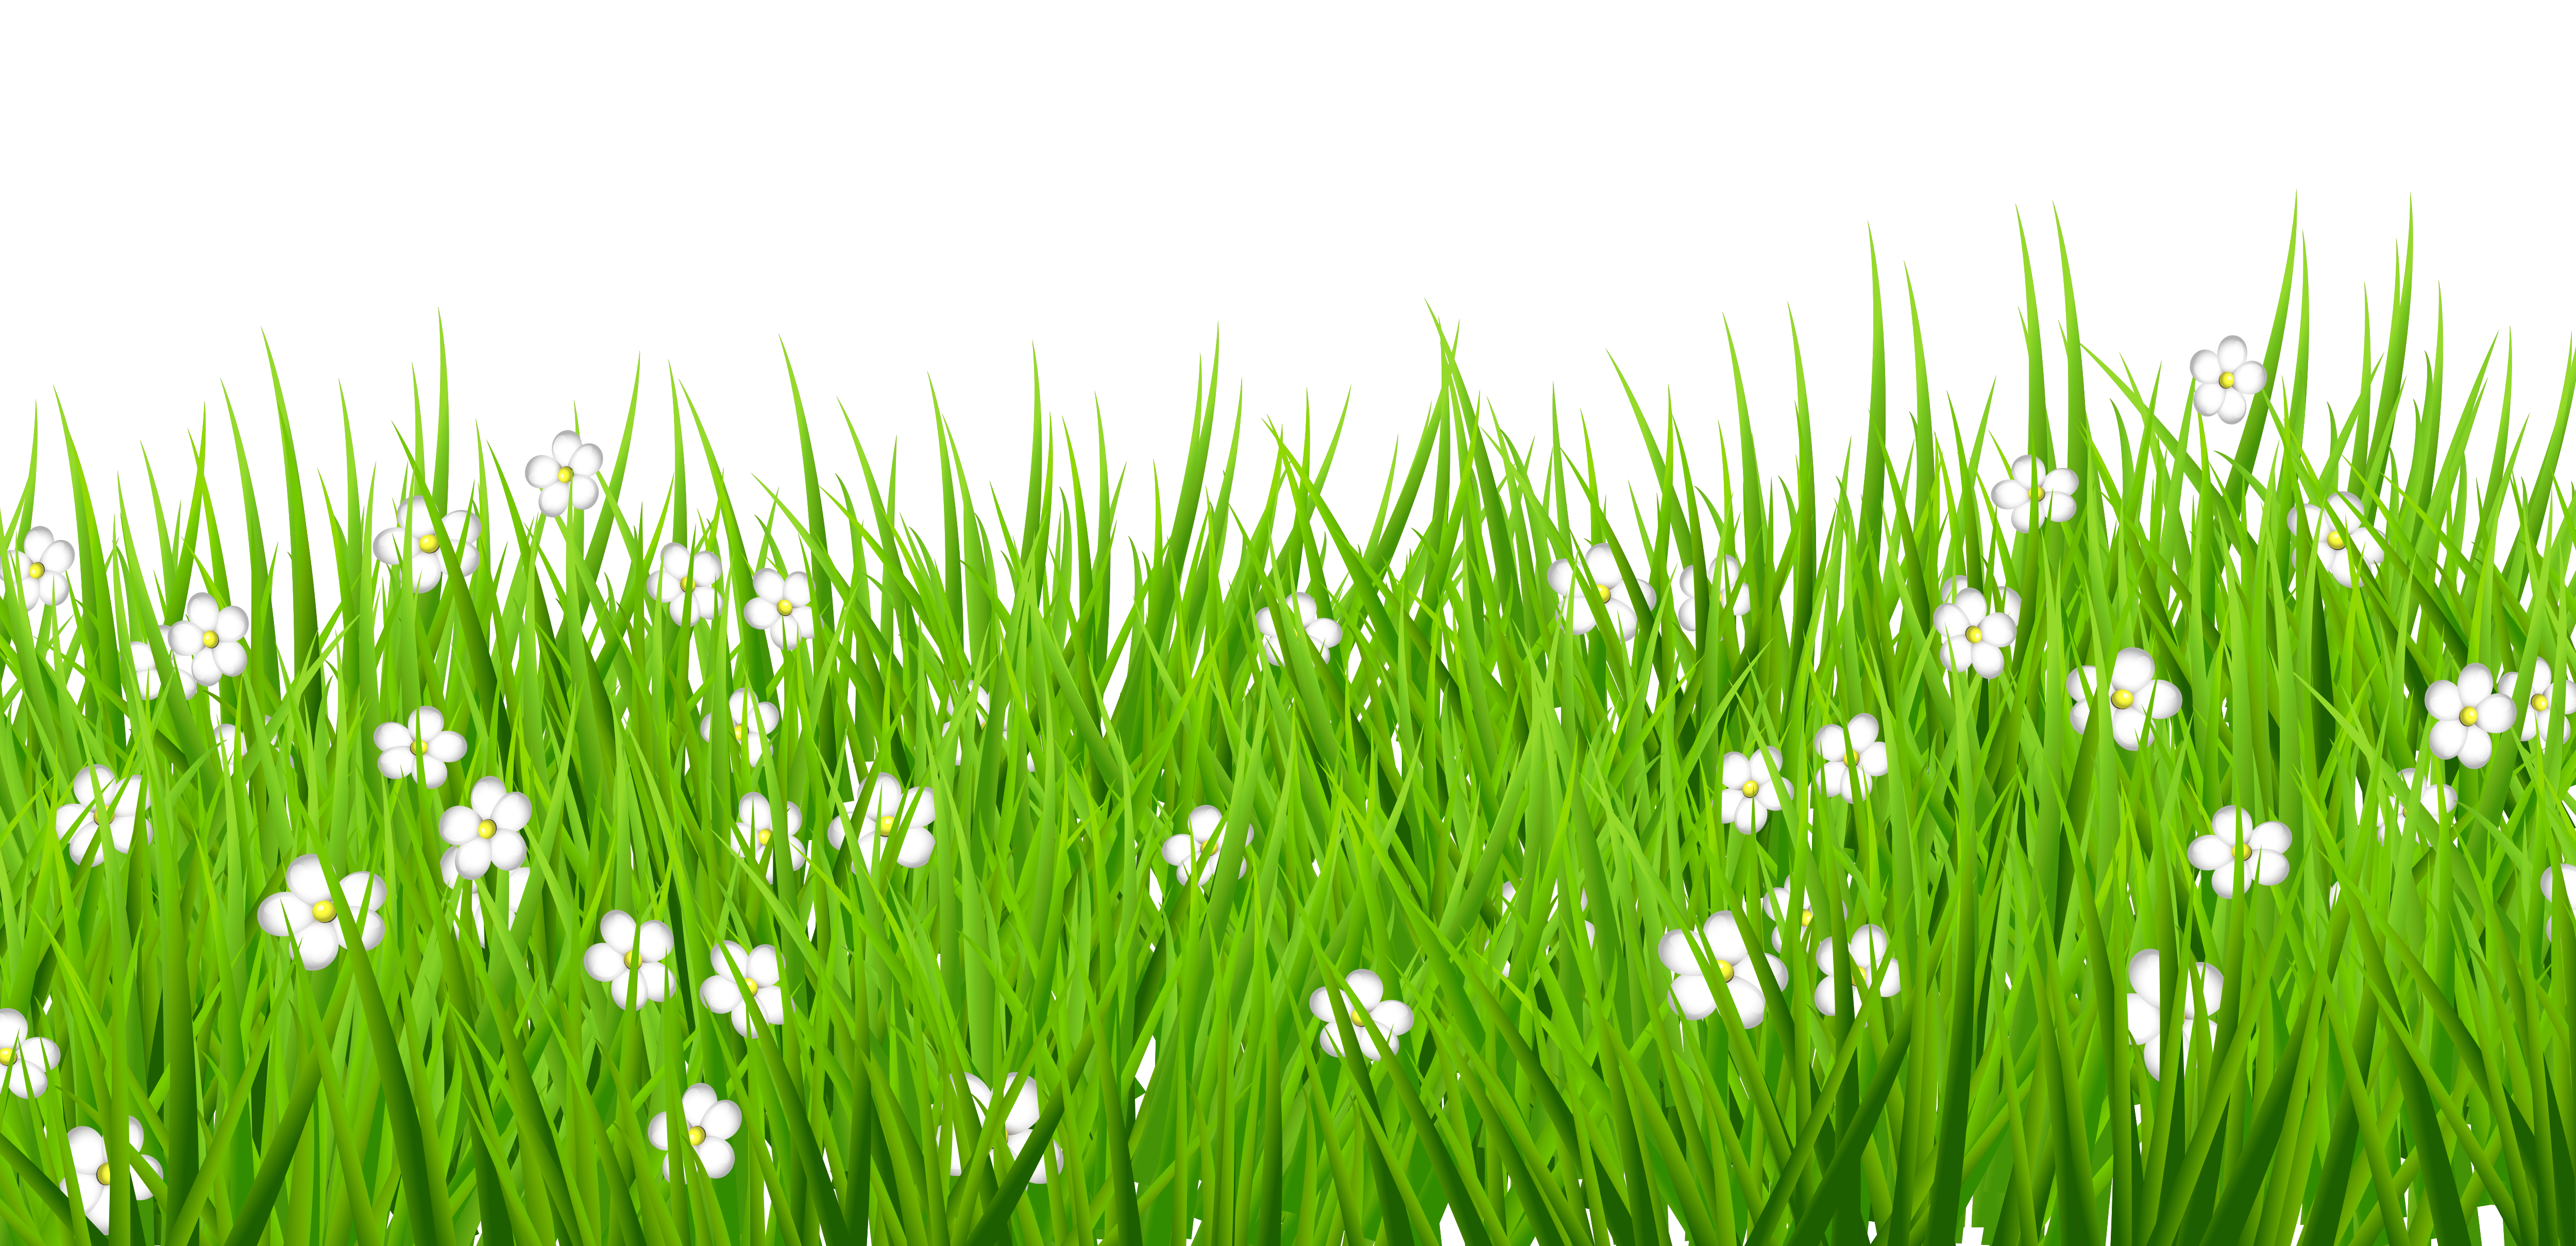 Free on dumielauxepices net. Grass clipart translucent